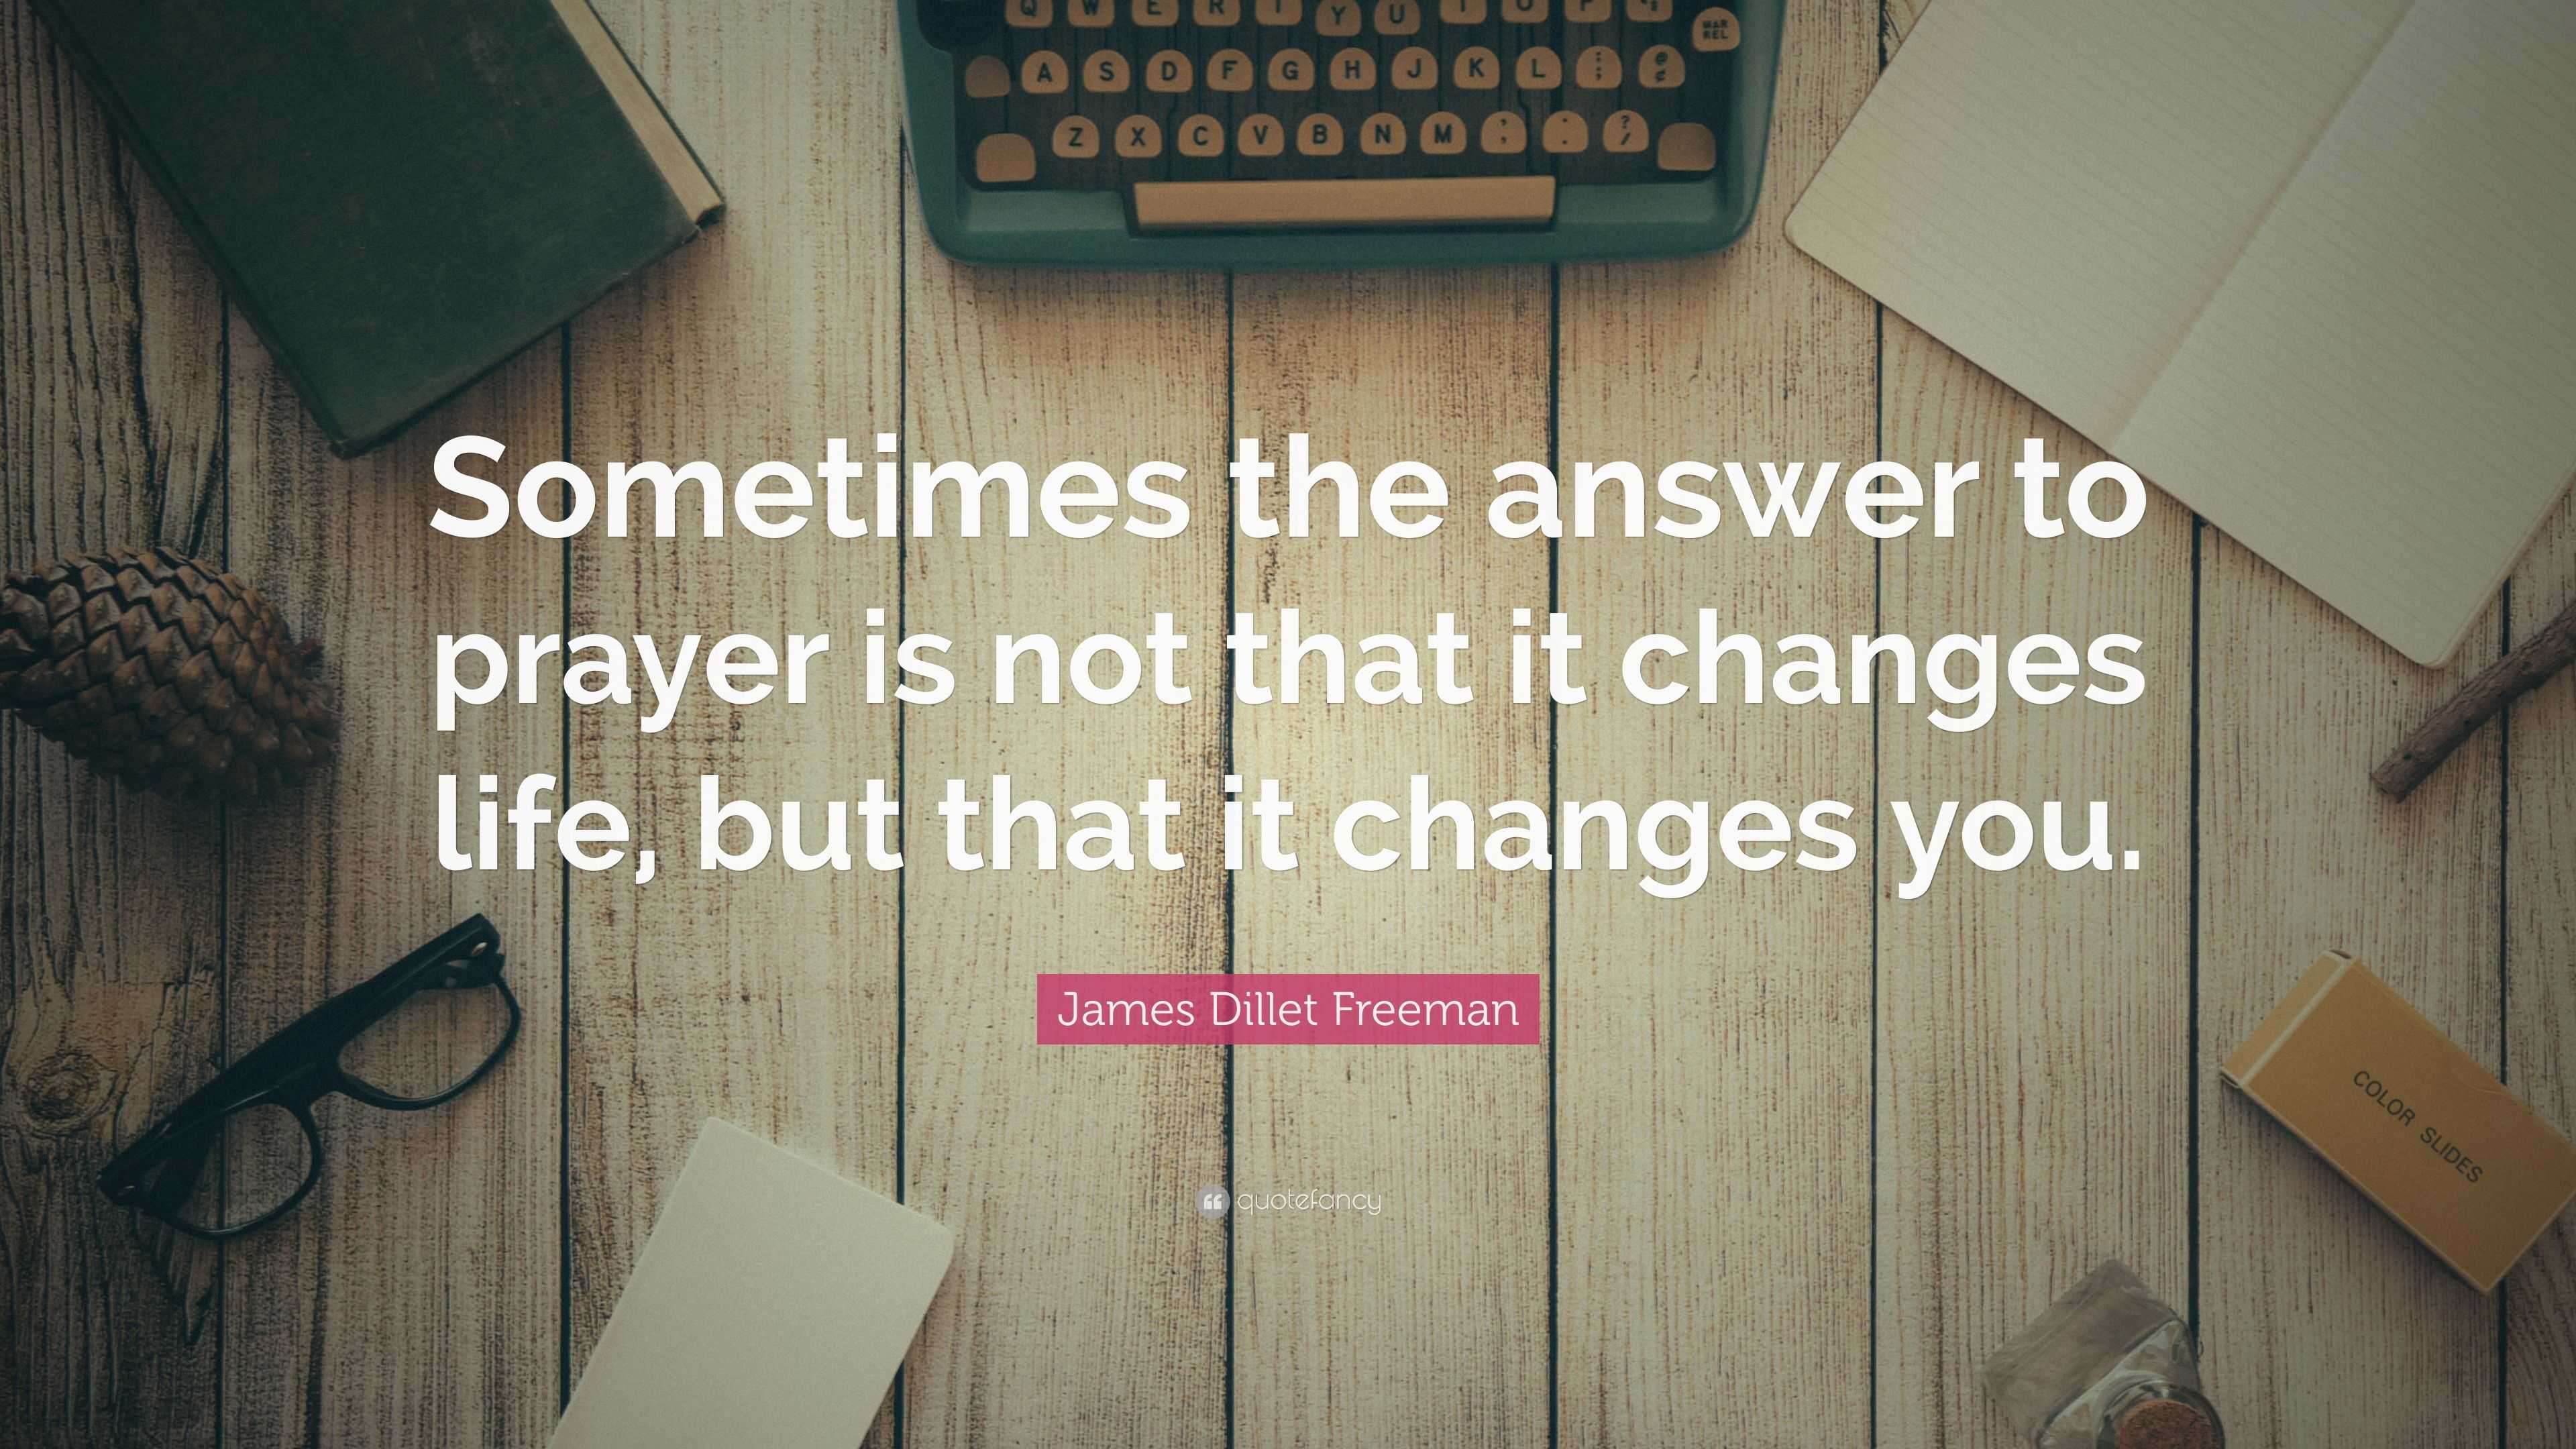 James Dillet Freeman Quote: “Sometimes the answer to prayer is not that ...